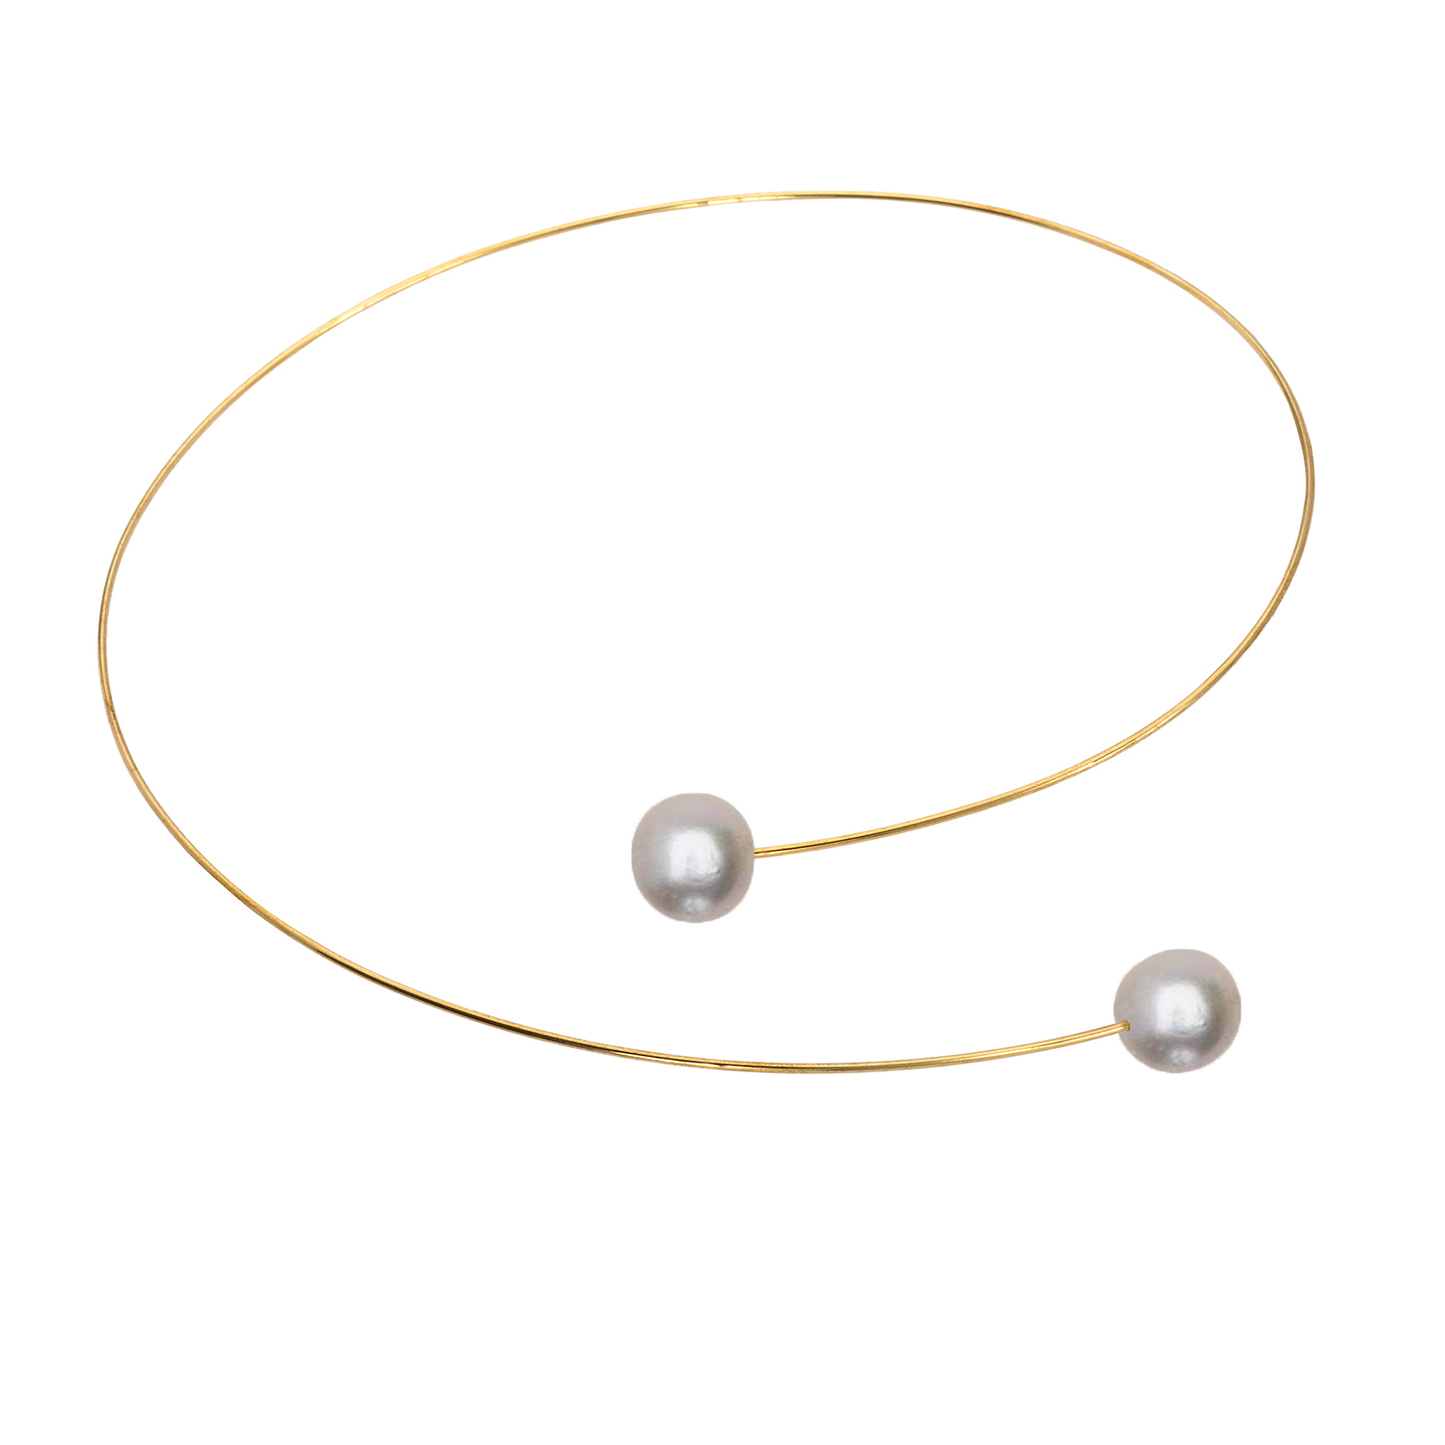 Round Asymmetric Neckwire with Round Freshwater Pearls